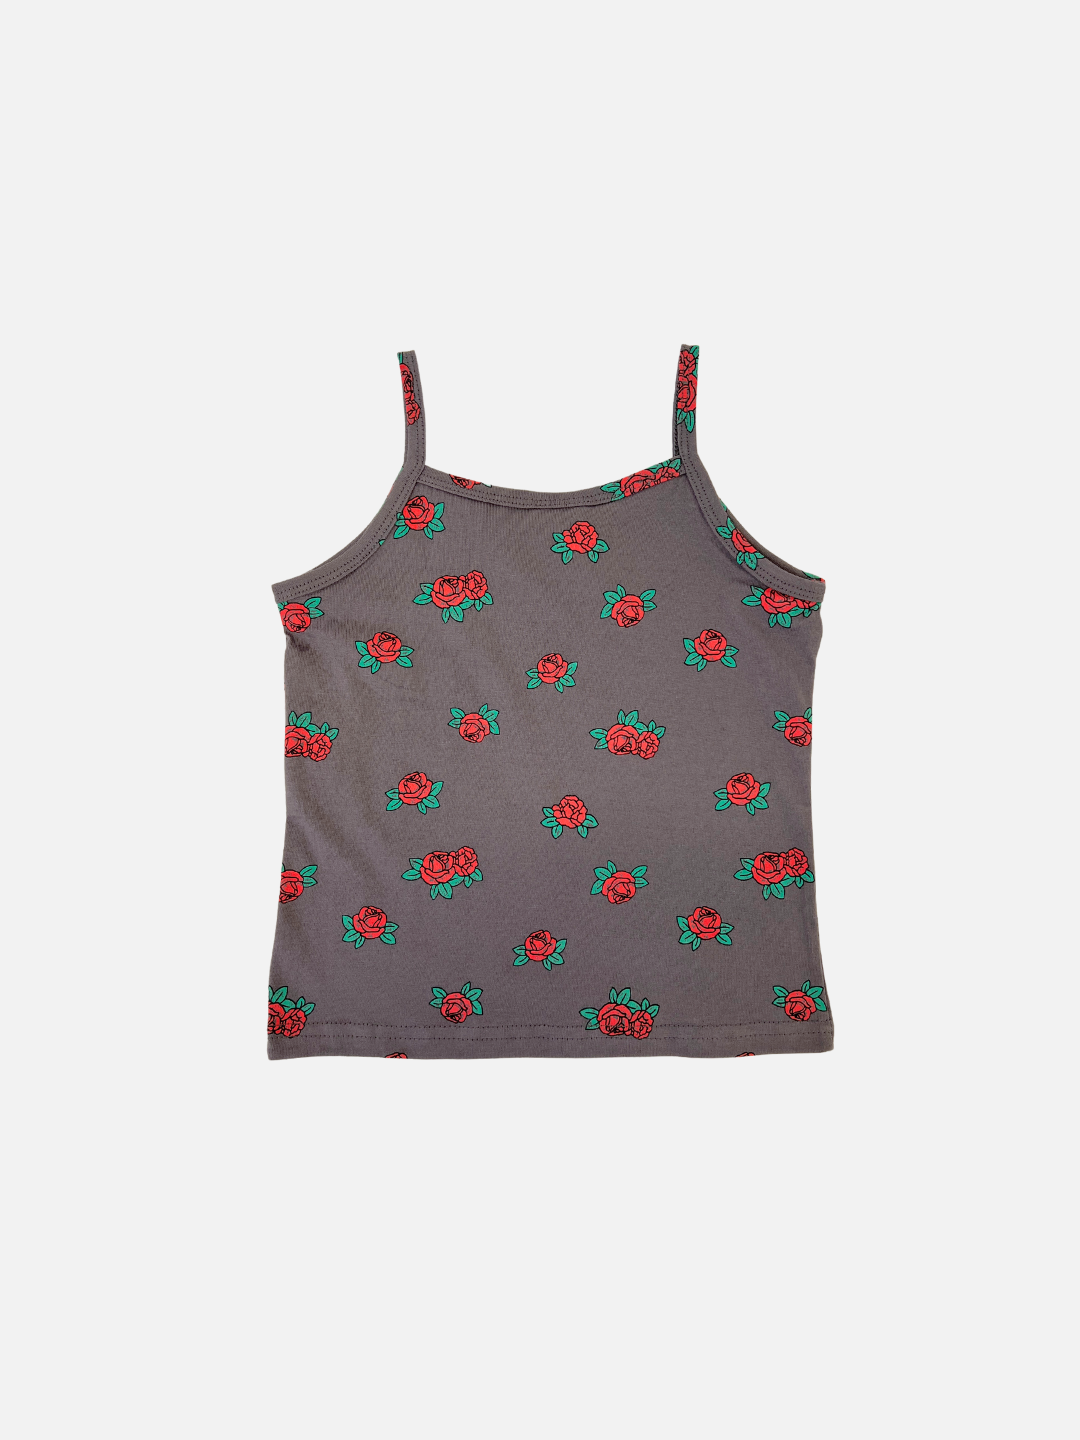 Back view of the kid's roses tank top in Charcoal with red roses all-over print